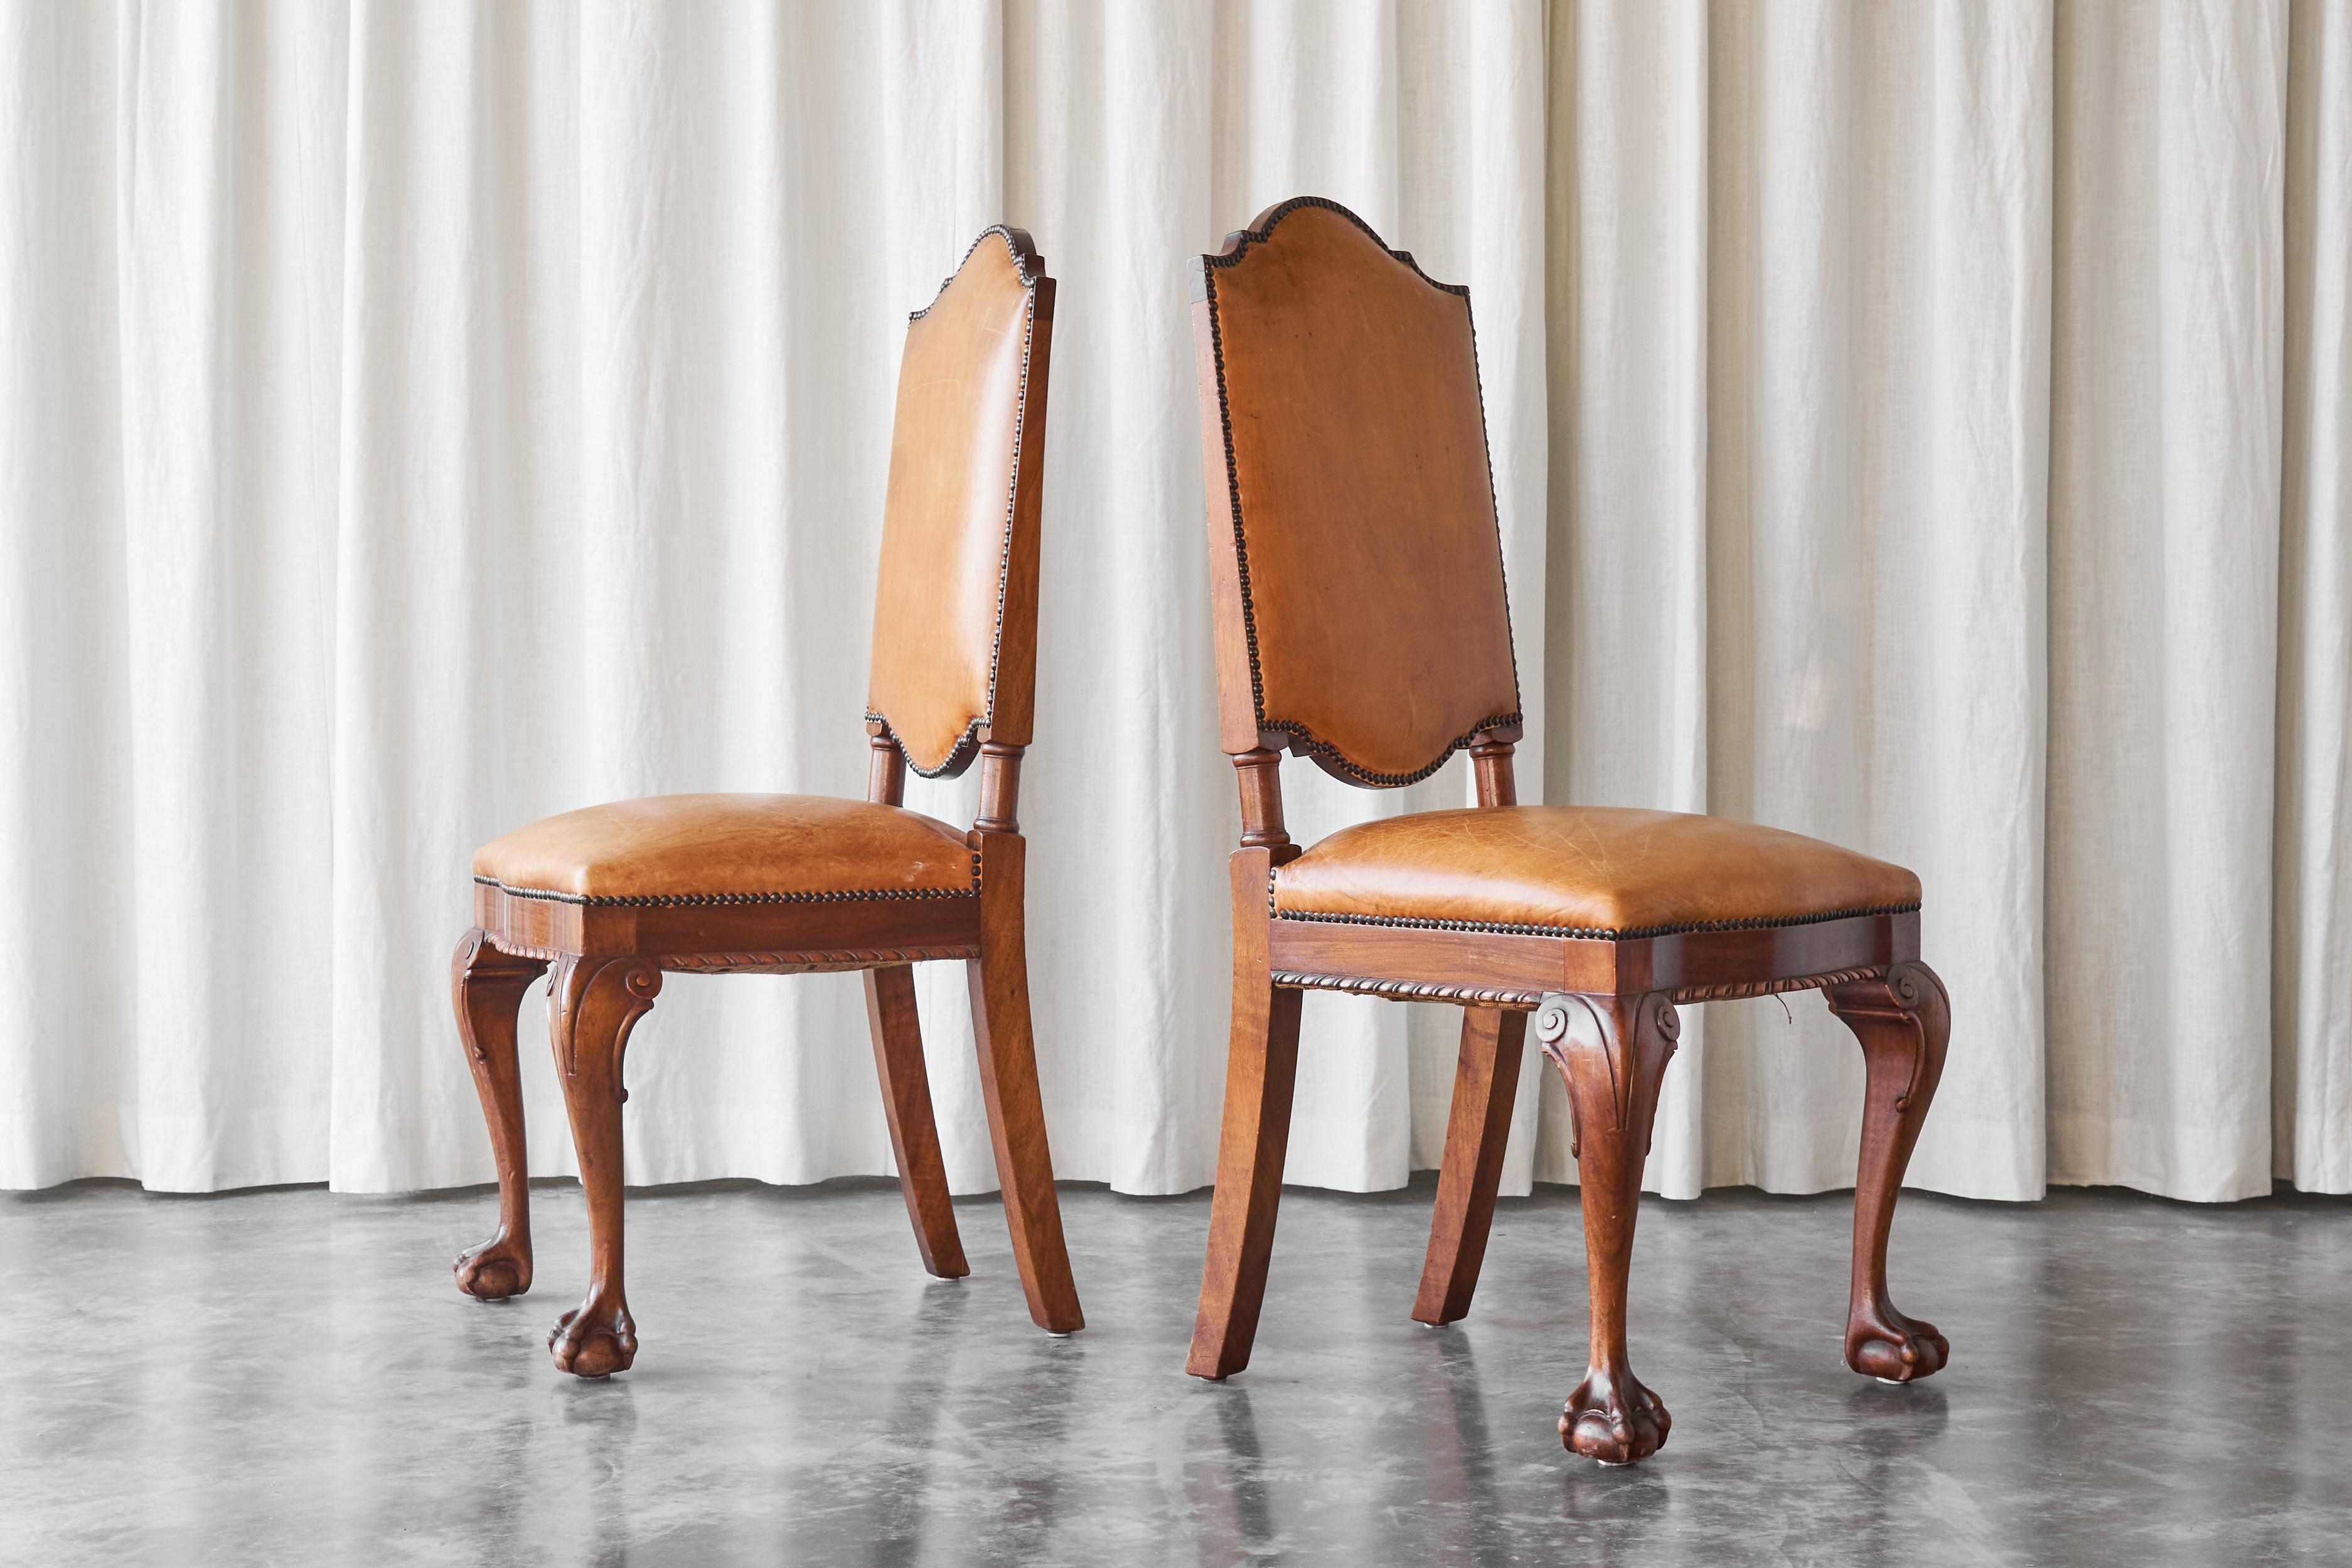 't Woonhuys Amsterdam Rare Pair of Side Chairs in Patinated Cognac Leather 1920s For Sale 6